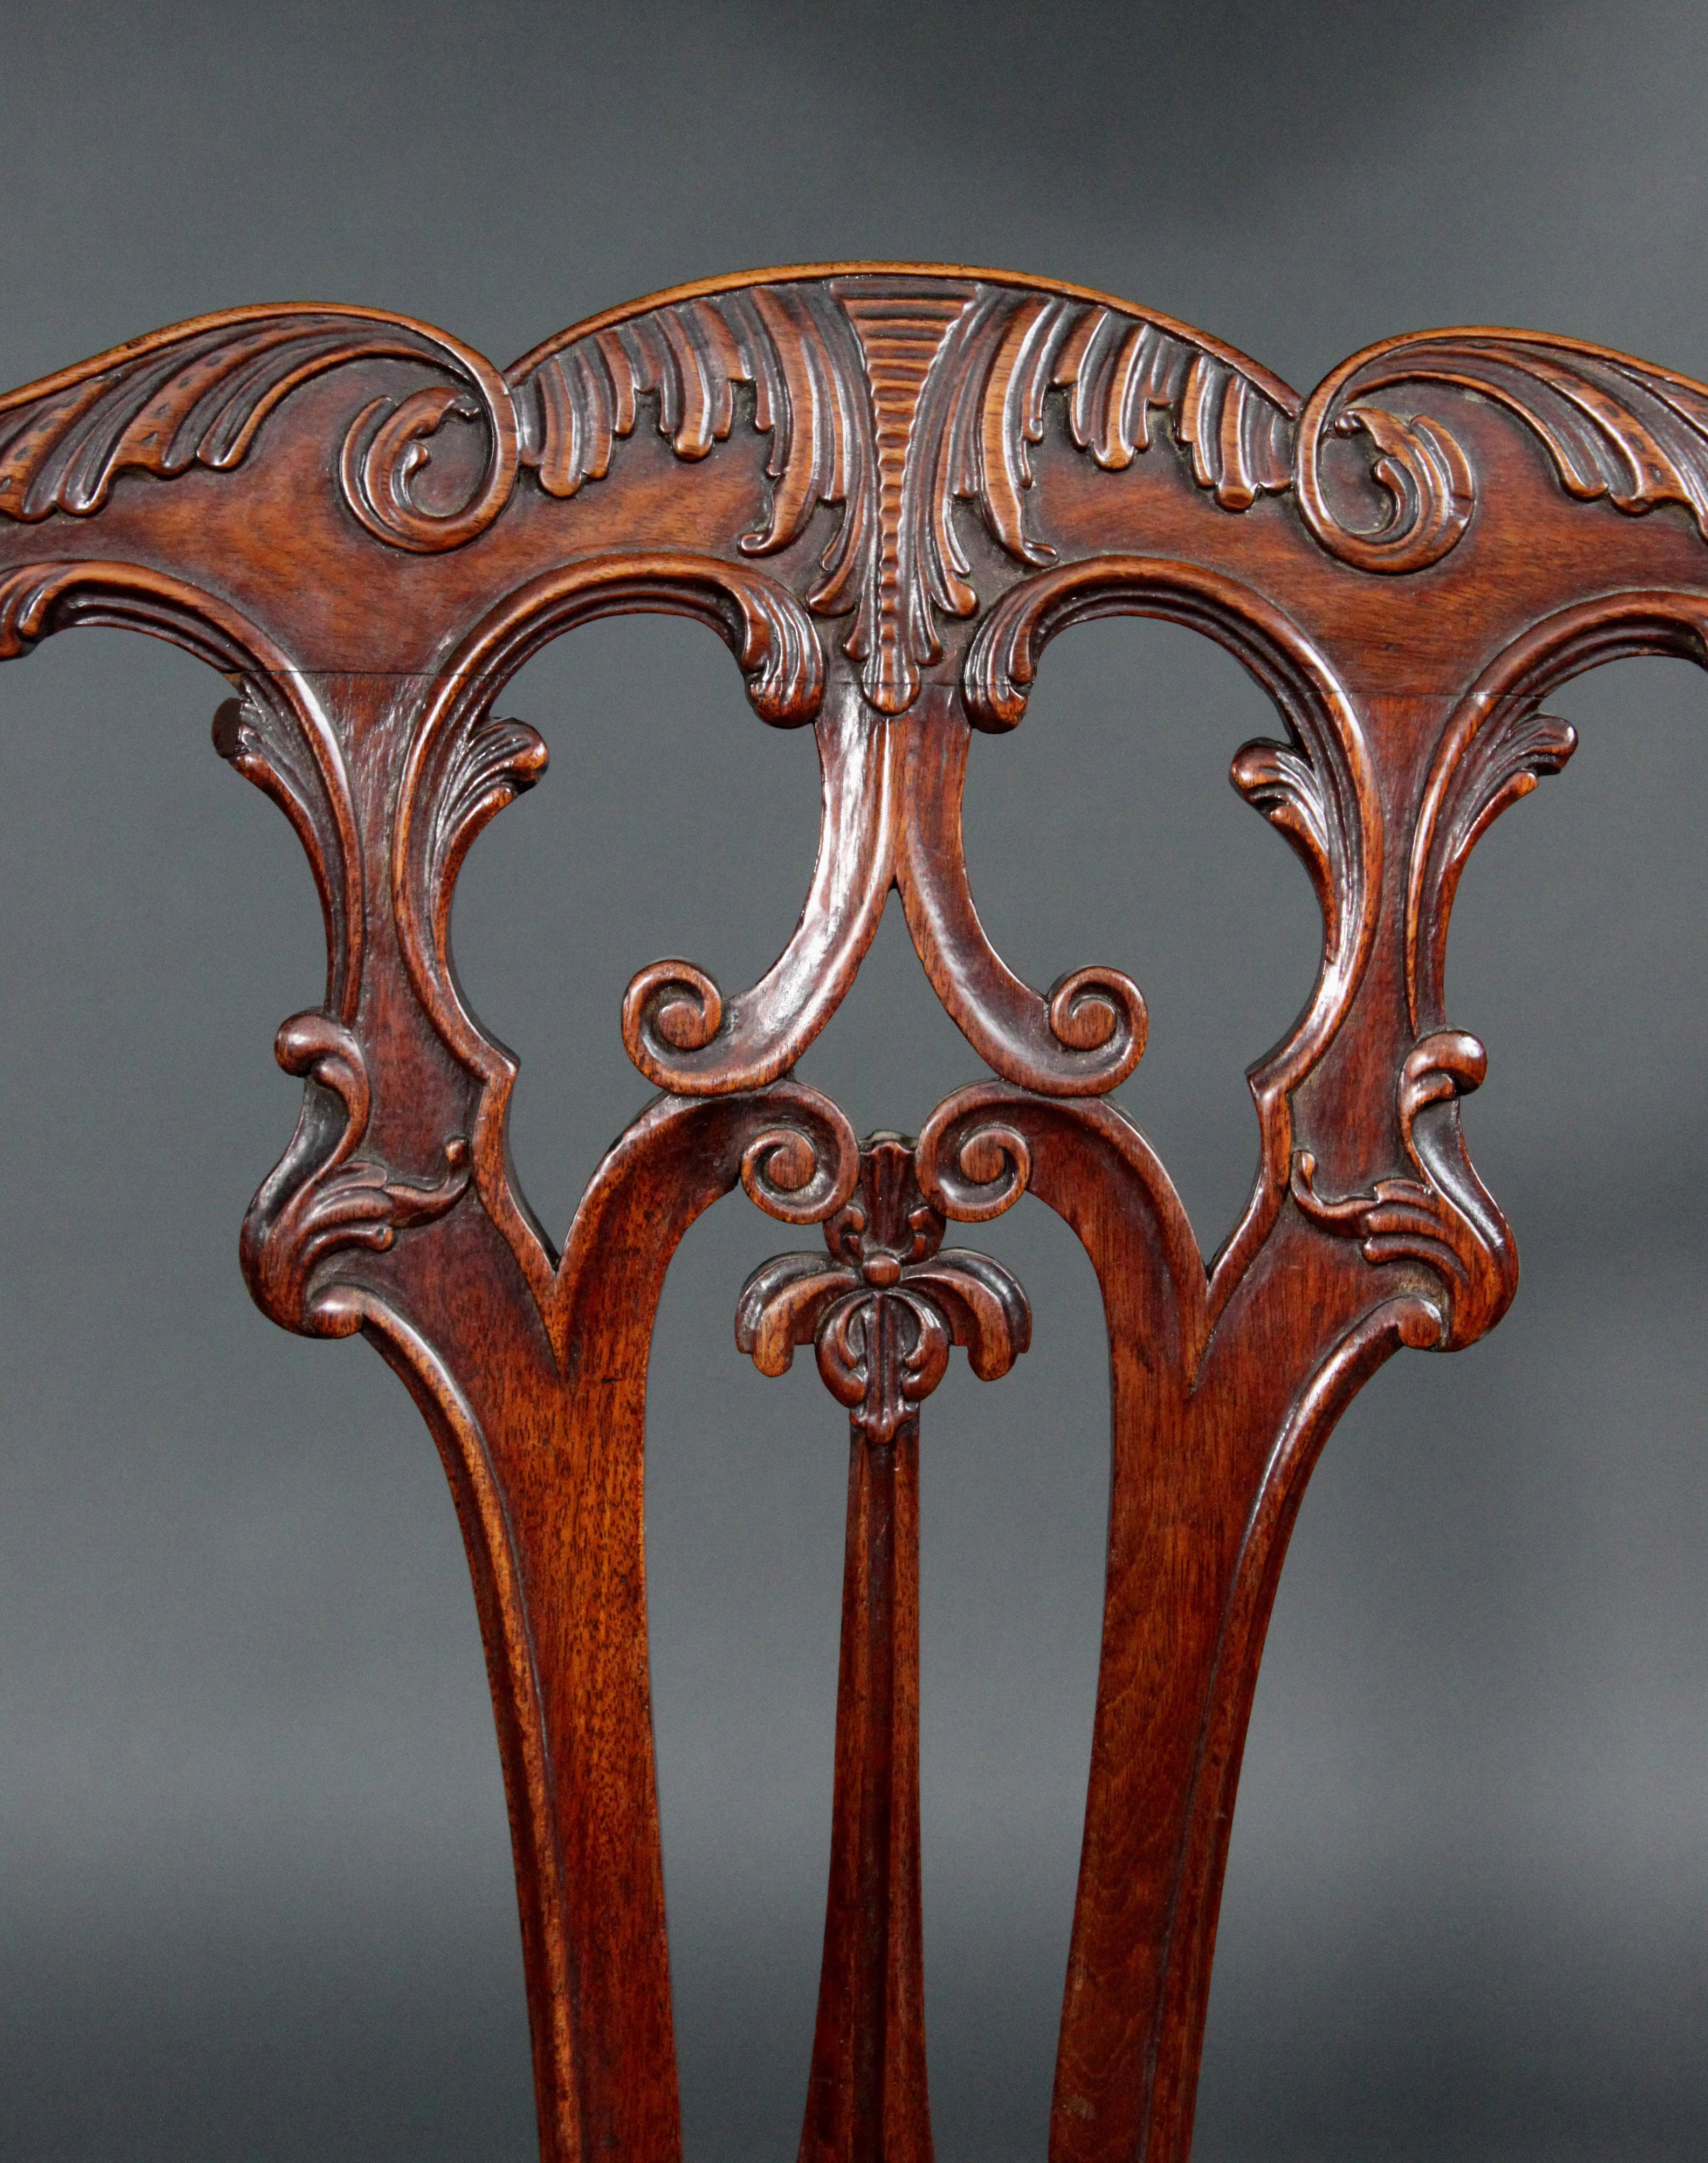 Mahogany Set of 6 George III Period Chairs after a Design by Thomas Chippendale